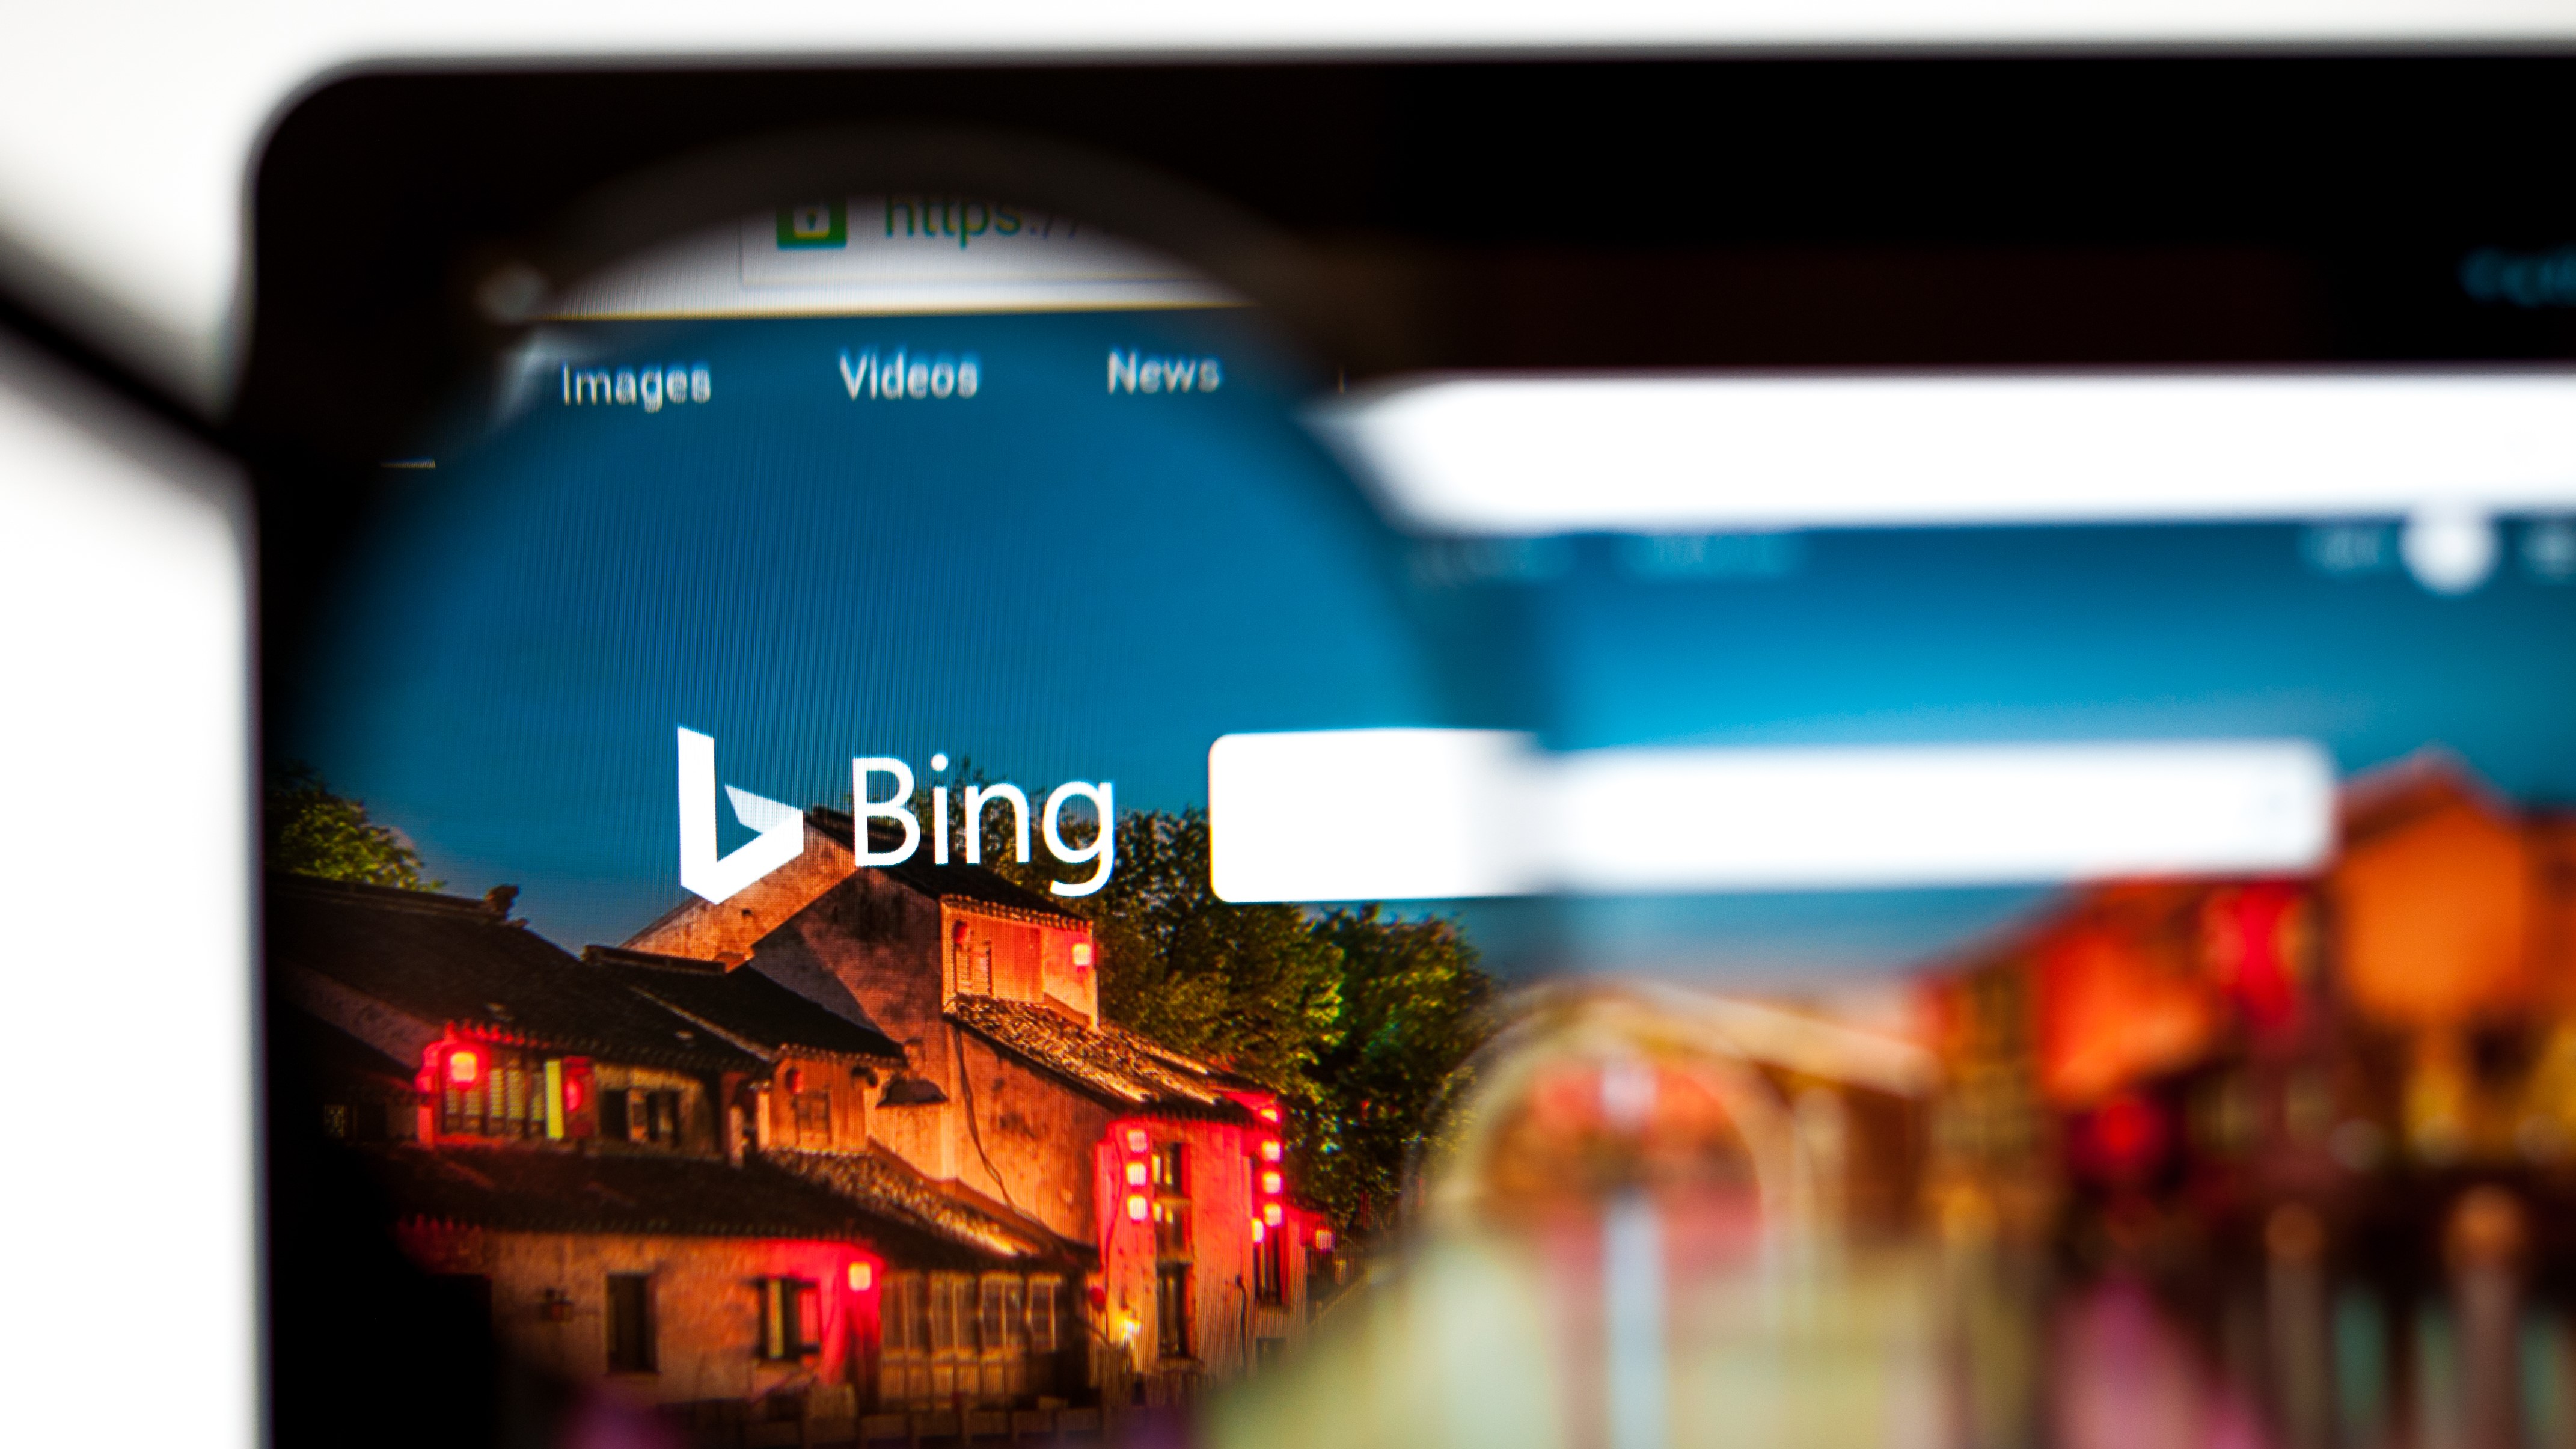 Bing.com website homepage viewed through a magnifying glass